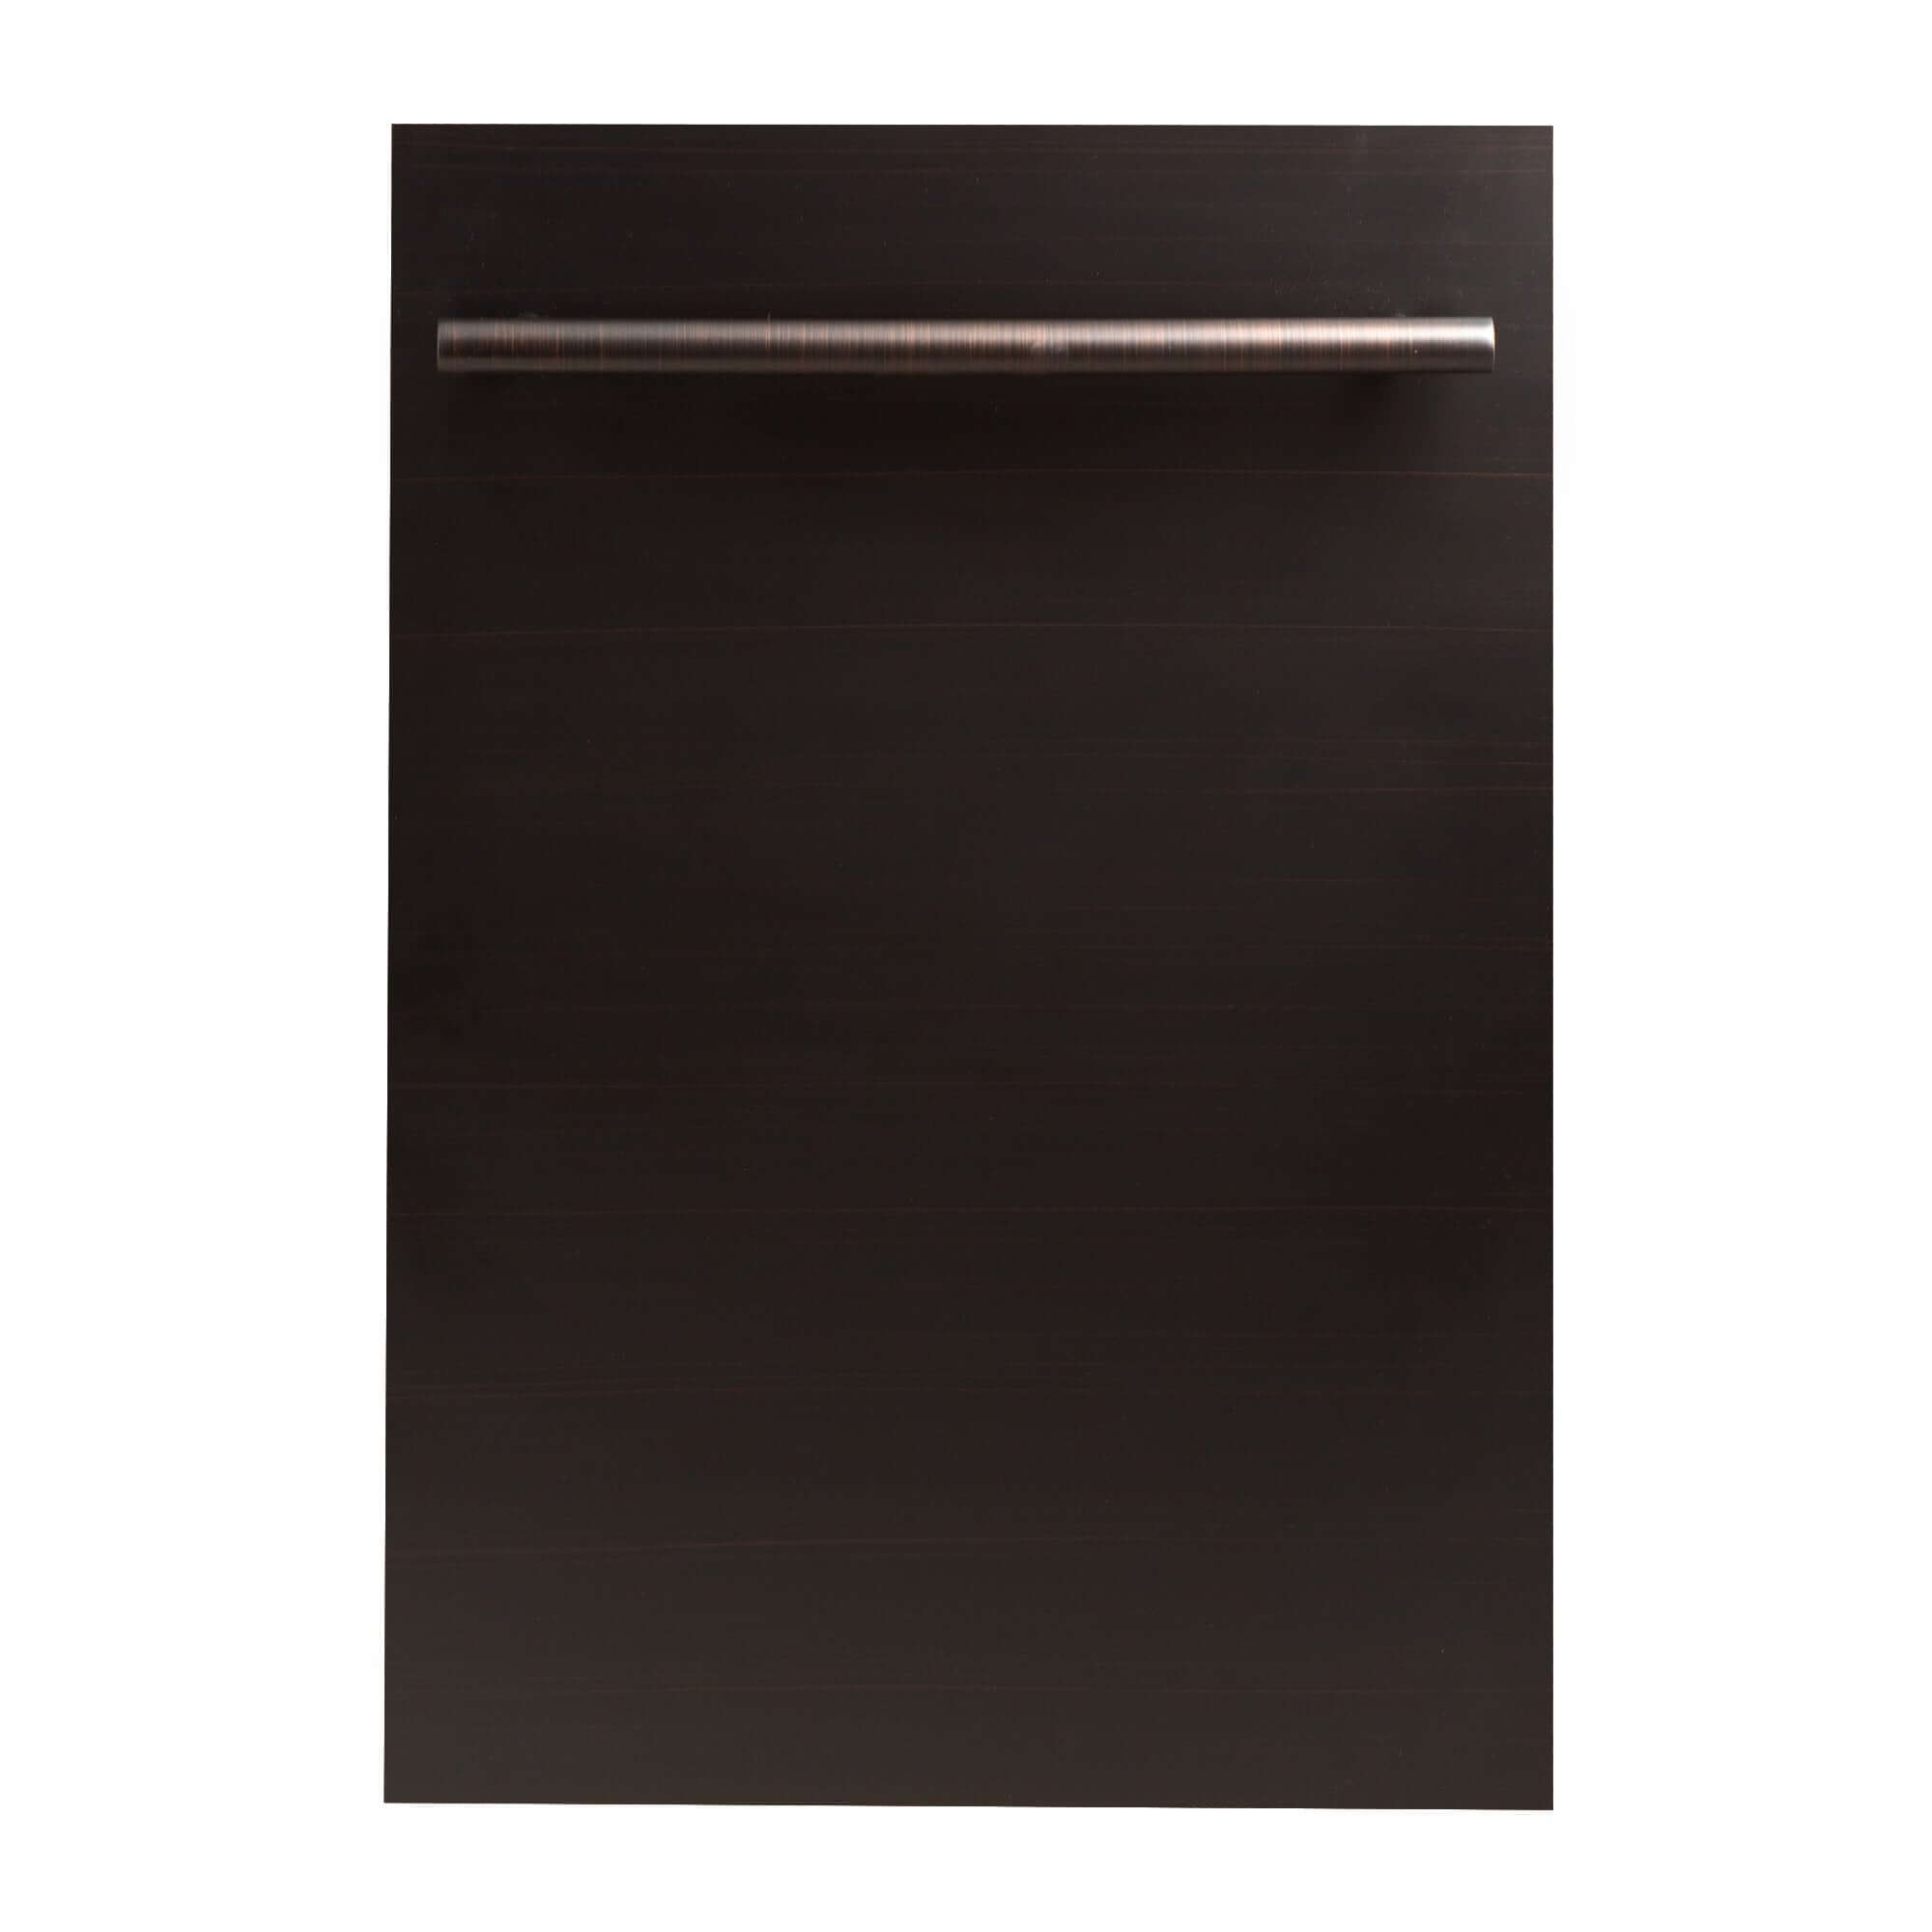 ZLINE 18" Dishwasher Panel with Modern Handle - Oil-Rubbed Bronze